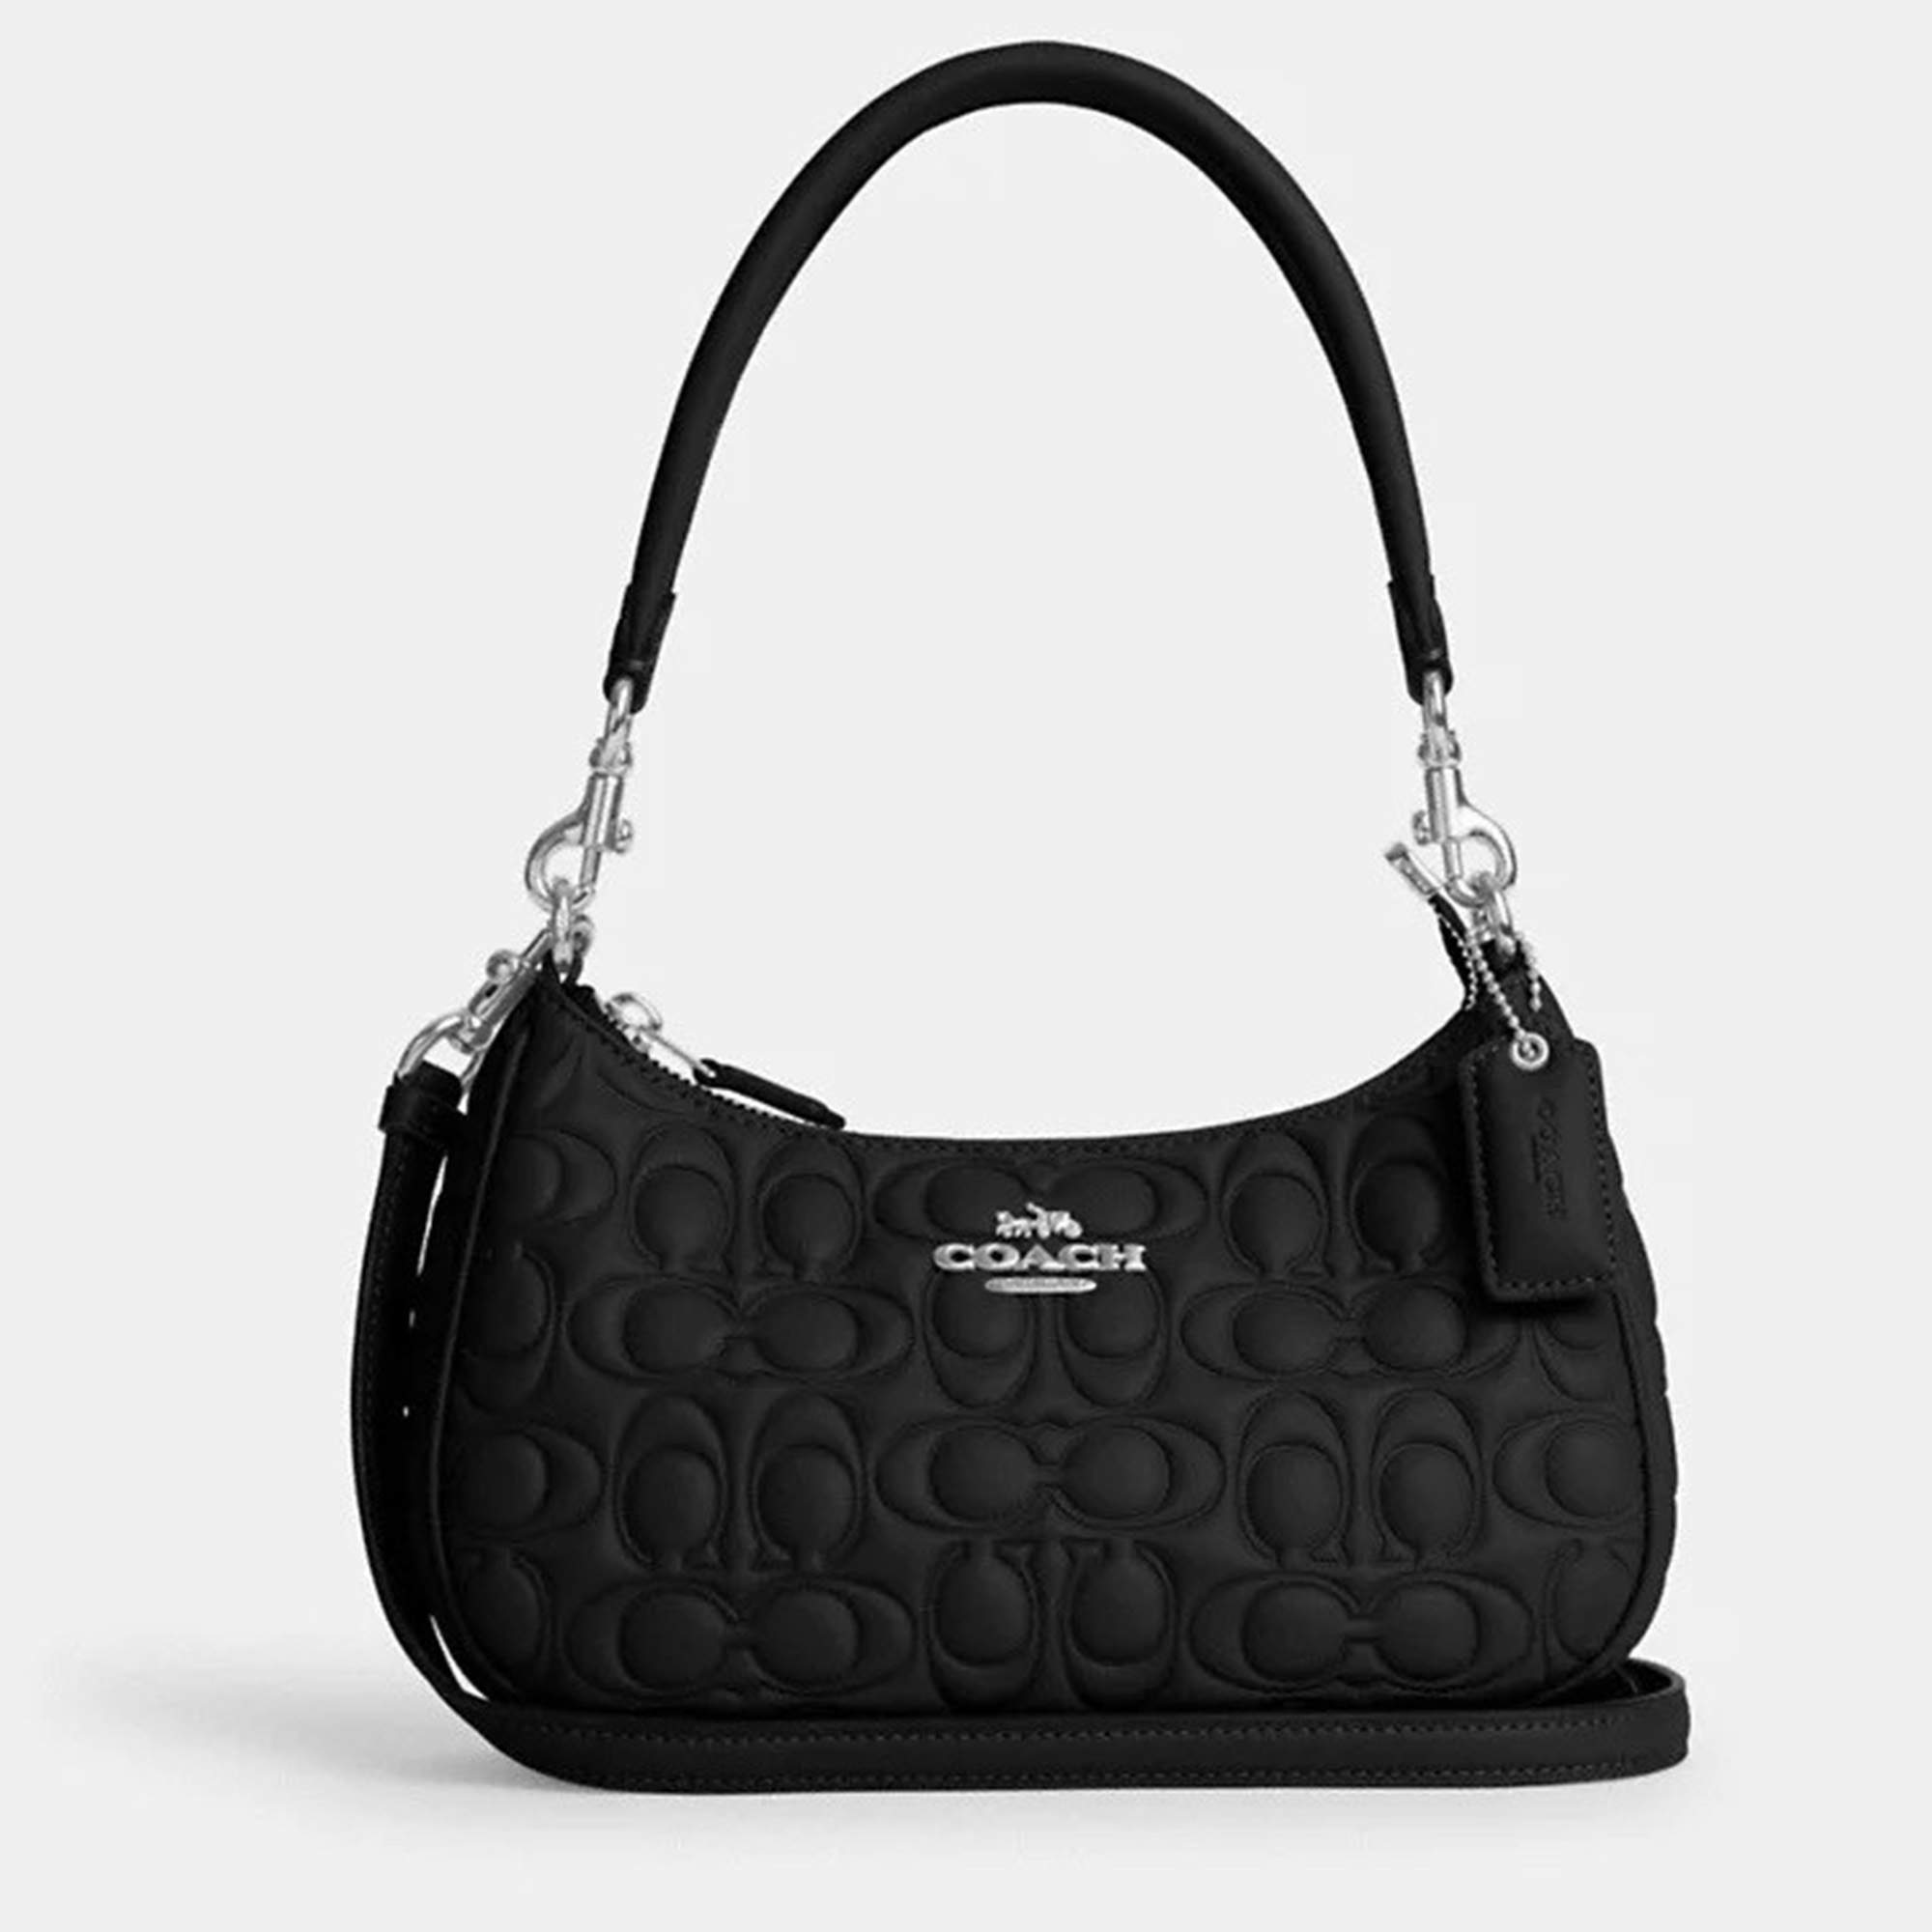 Coach Ergo Black Leather Gold Detail Flap Over Closure Shoulder Bag 11263 |  Black leather, Shoulder bag, Leather